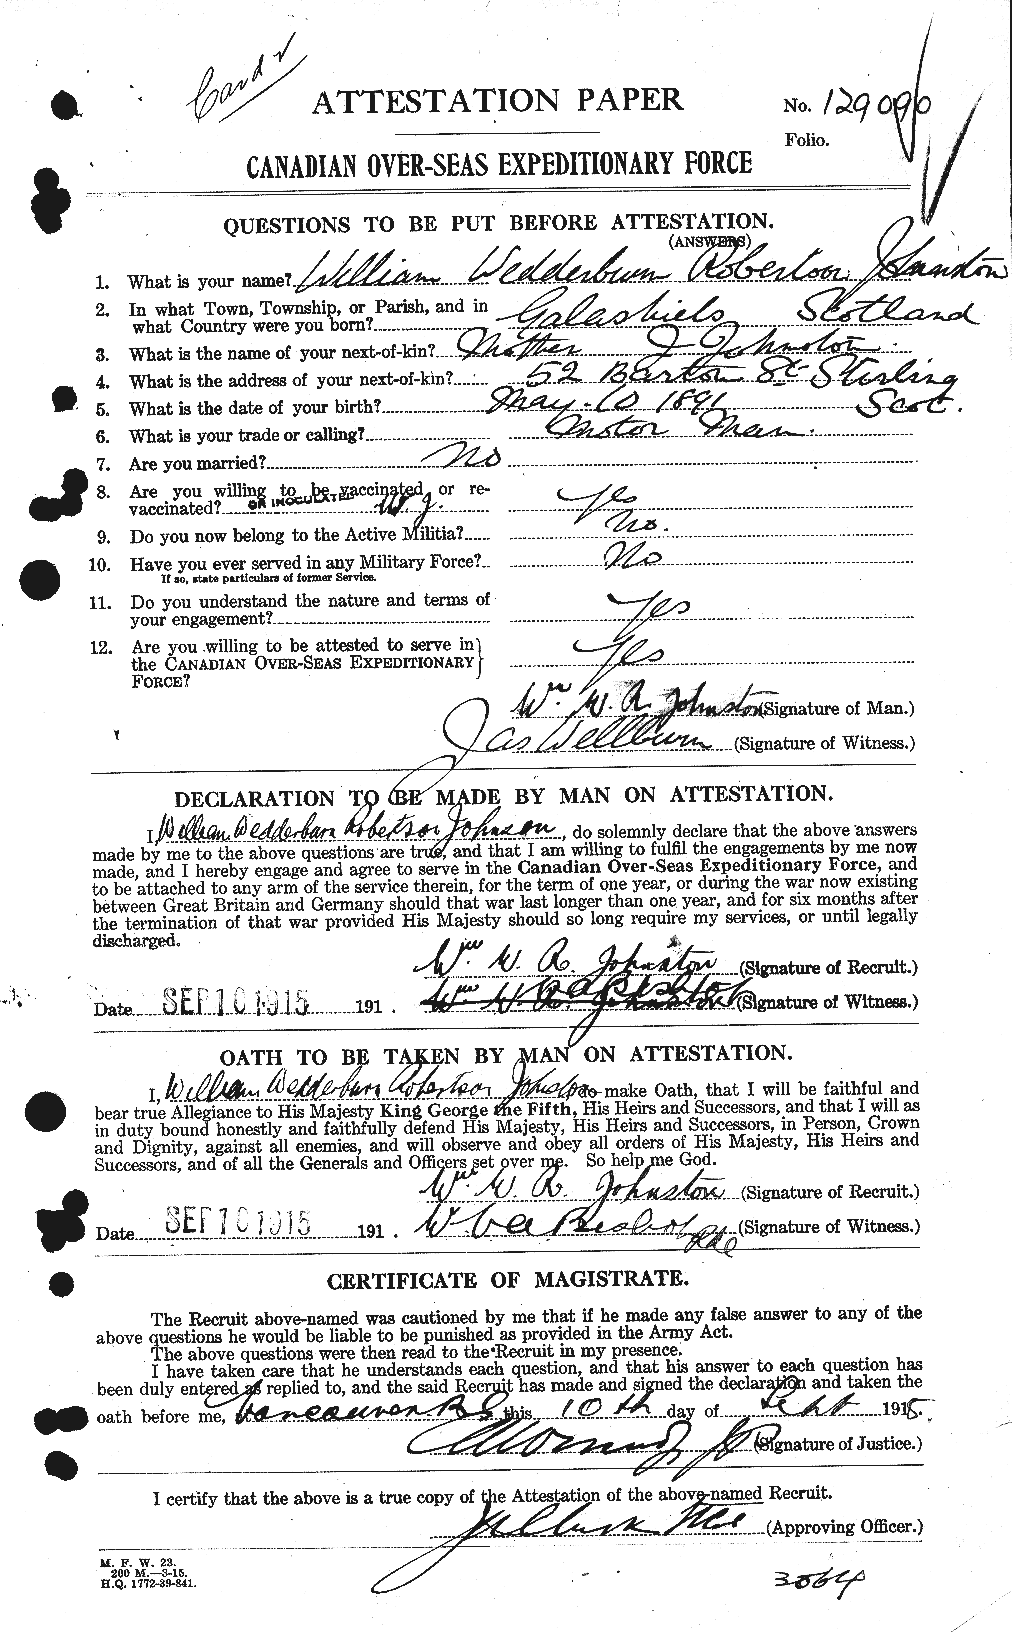 Personnel Records of the First World War - CEF 429629a